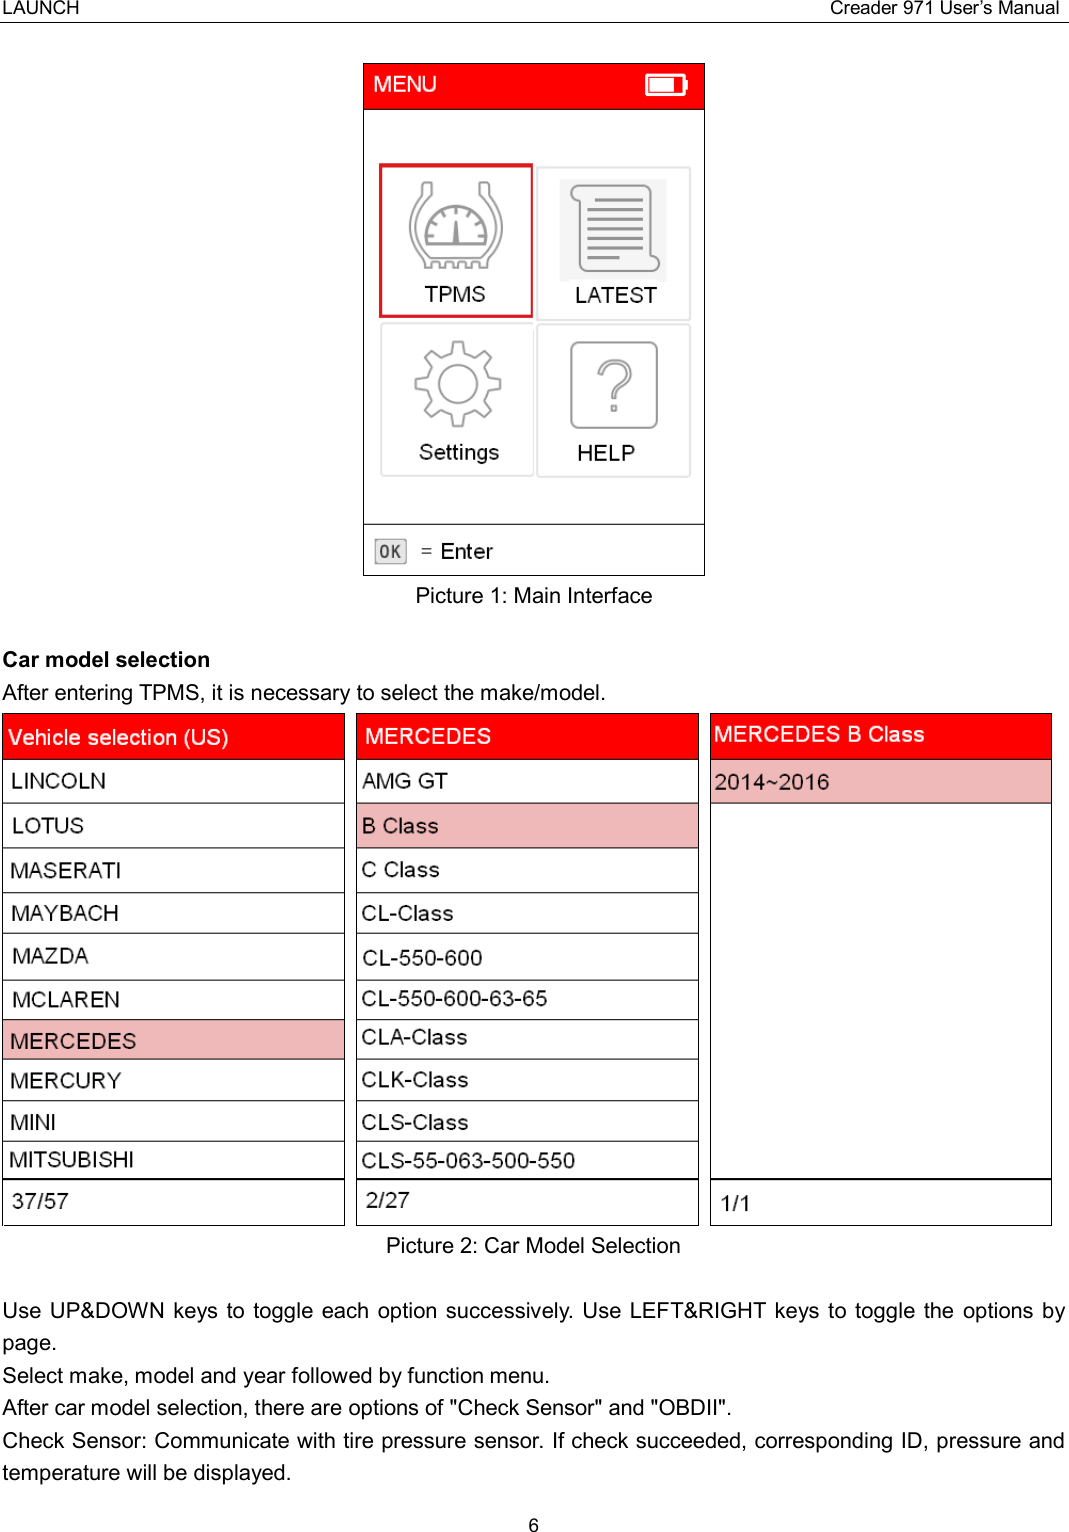 LAUNCH                                                                                Creader 971 User’s Manual 6   Picture 1: Main Interface  Car model selection After entering TPMS, it is necessary to select the make/model.    Picture 2: Car Model Selection  Use UP&amp;DOWN keys to  toggle  each  option successively.  Use LEFT&amp;RIGHT  keys to  toggle the  options by page. Select make, model and year followed by function menu. After car model selection, there are options of &quot;Check Sensor&quot; and &quot;OBDII&quot;.   Check Sensor: Communicate with tire pressure sensor. If check succeeded, corresponding ID, pressure and temperature will be displayed. 